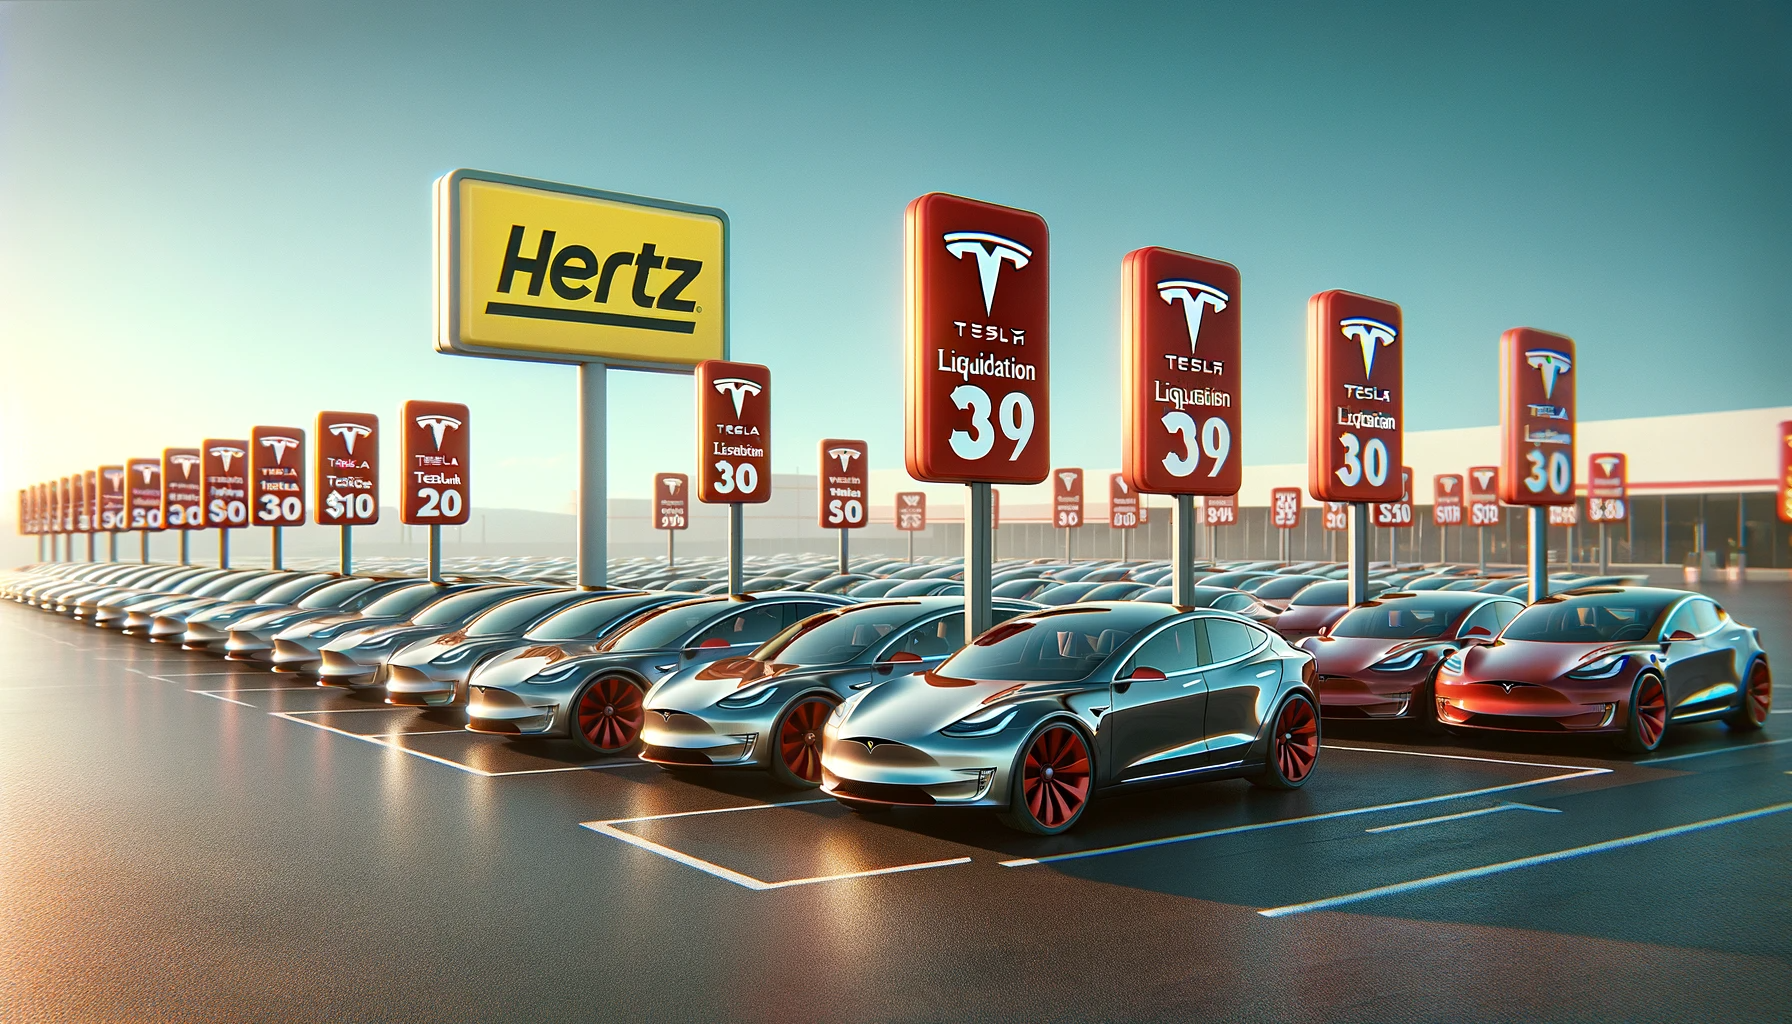 Banner showing Tesla cars on sale at a Hertz lot, with discount signs, symbolizing the large-scale Tesla EV liquidation by Hertz.